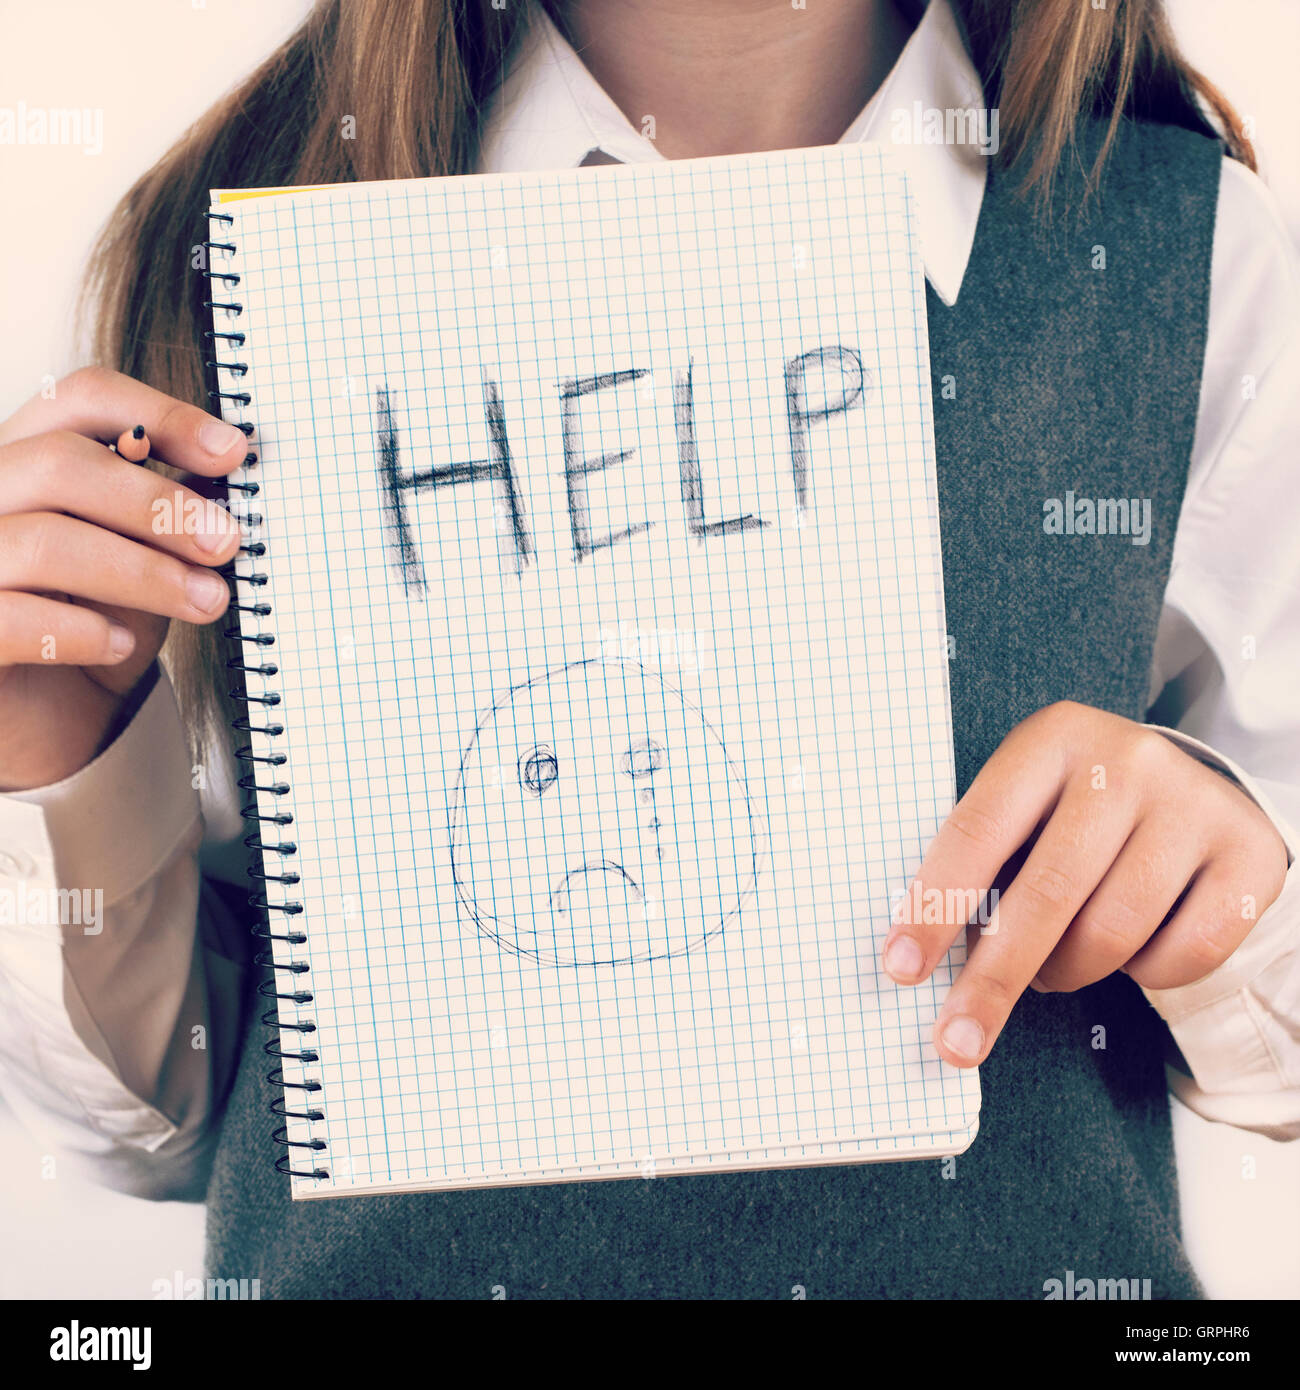 An image covering the Social Issues of child abuse, schoolchild in uniform asking for help by a written message saying Help with Stock Photo